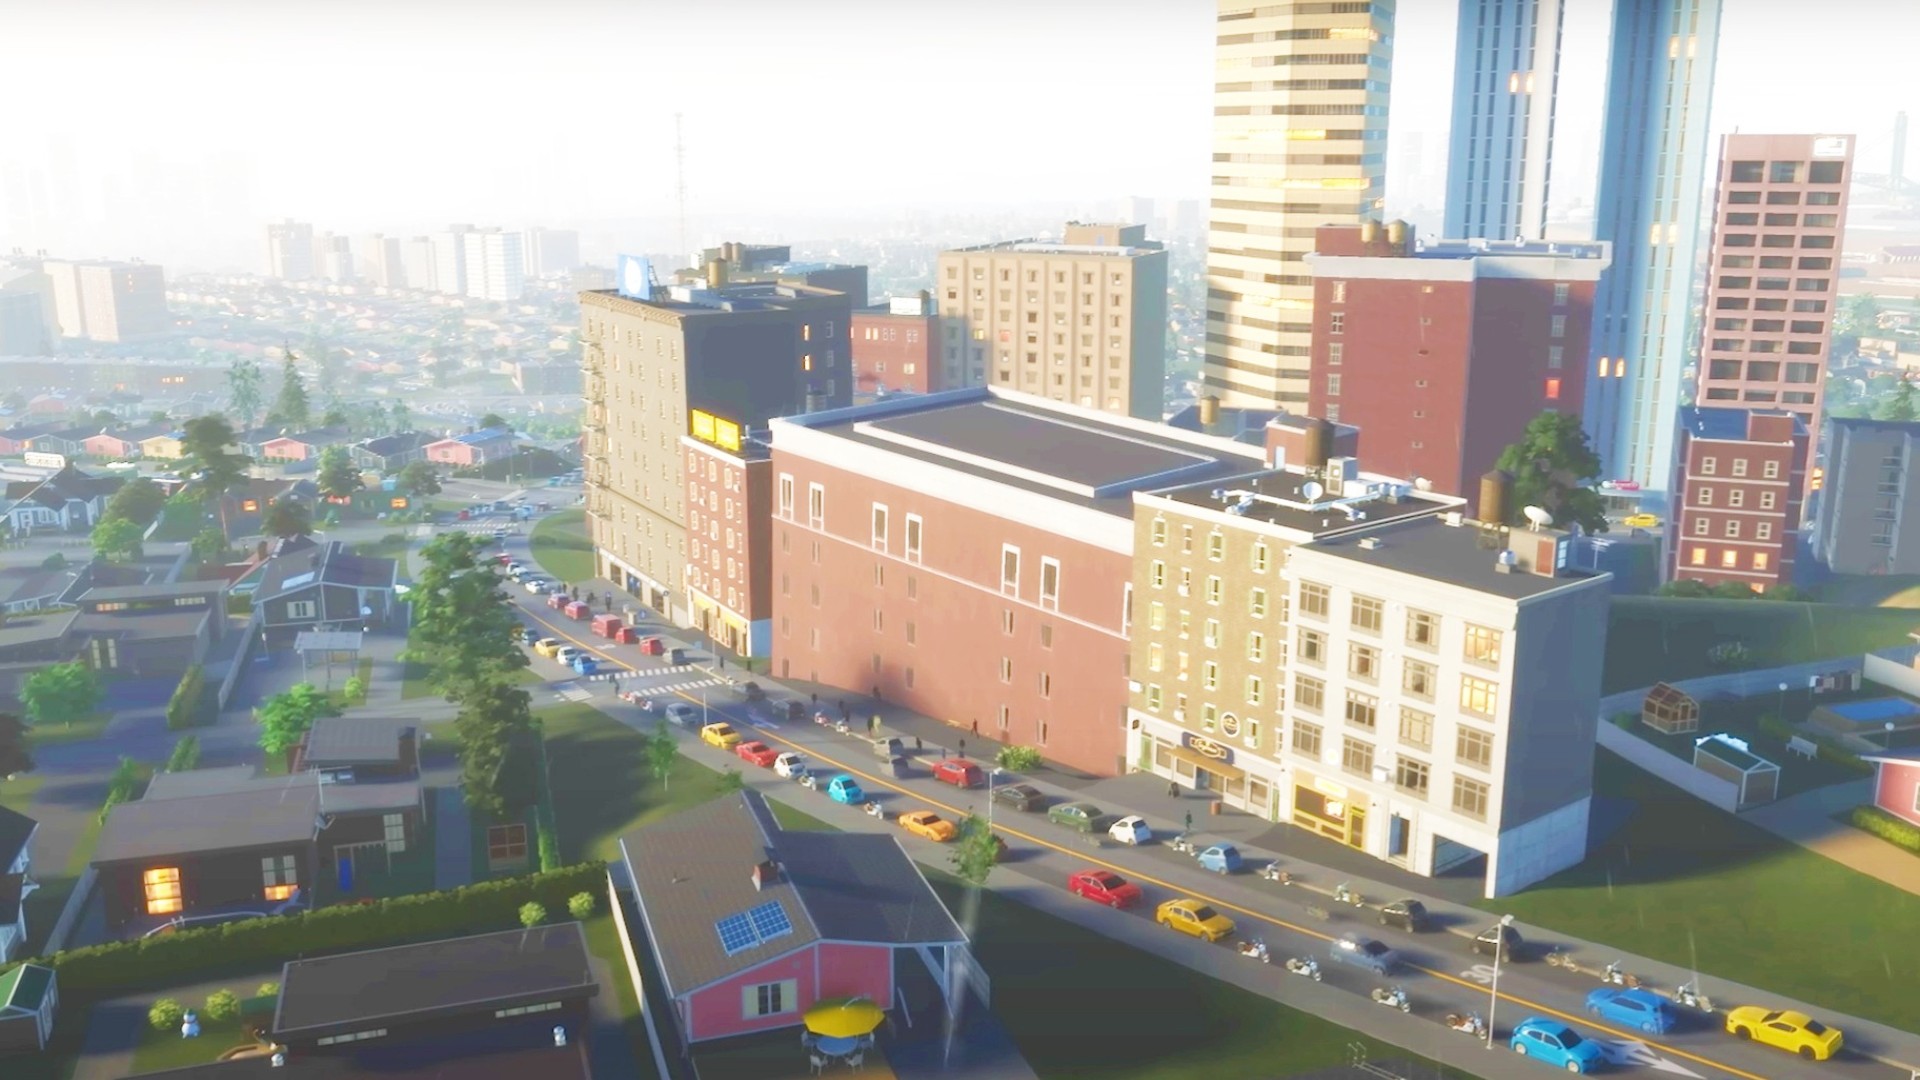 Cities Skylines 2 mods will not arrive “super close” to release